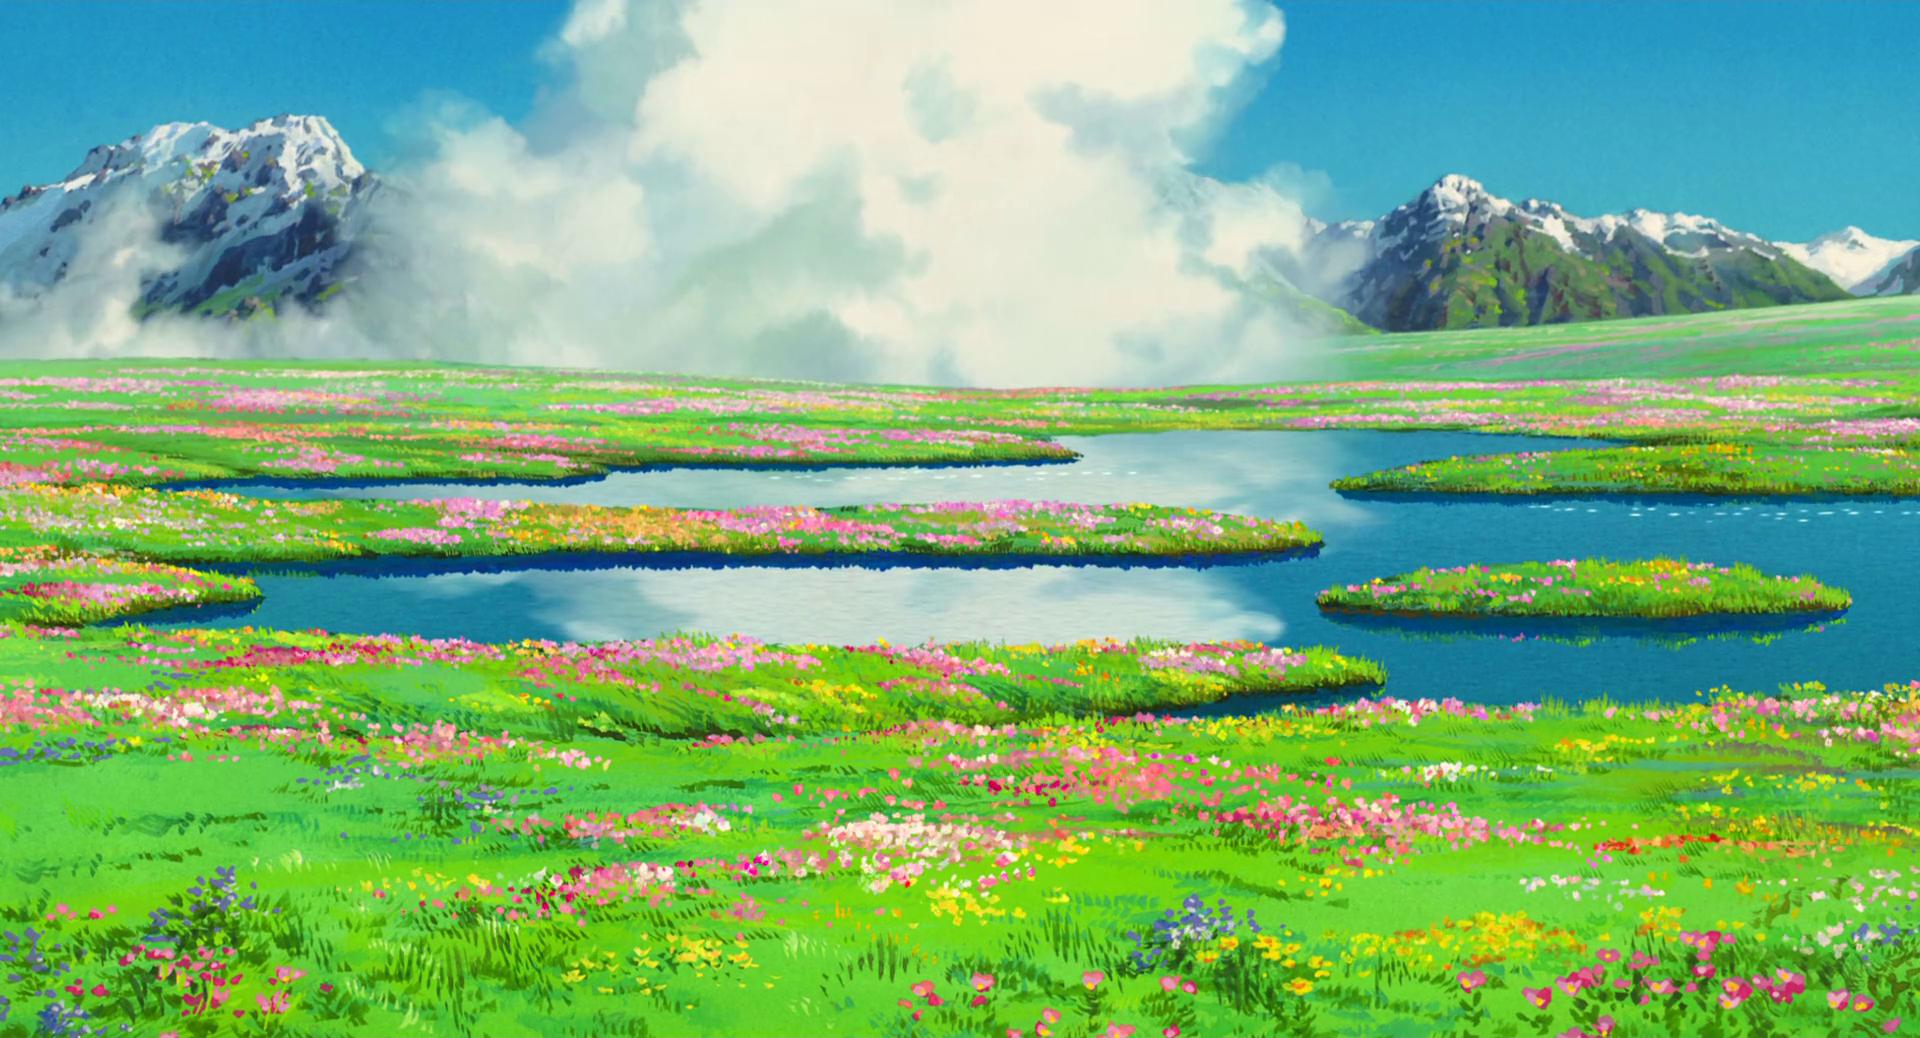 Wallpaper Wednesday Another Ghibli